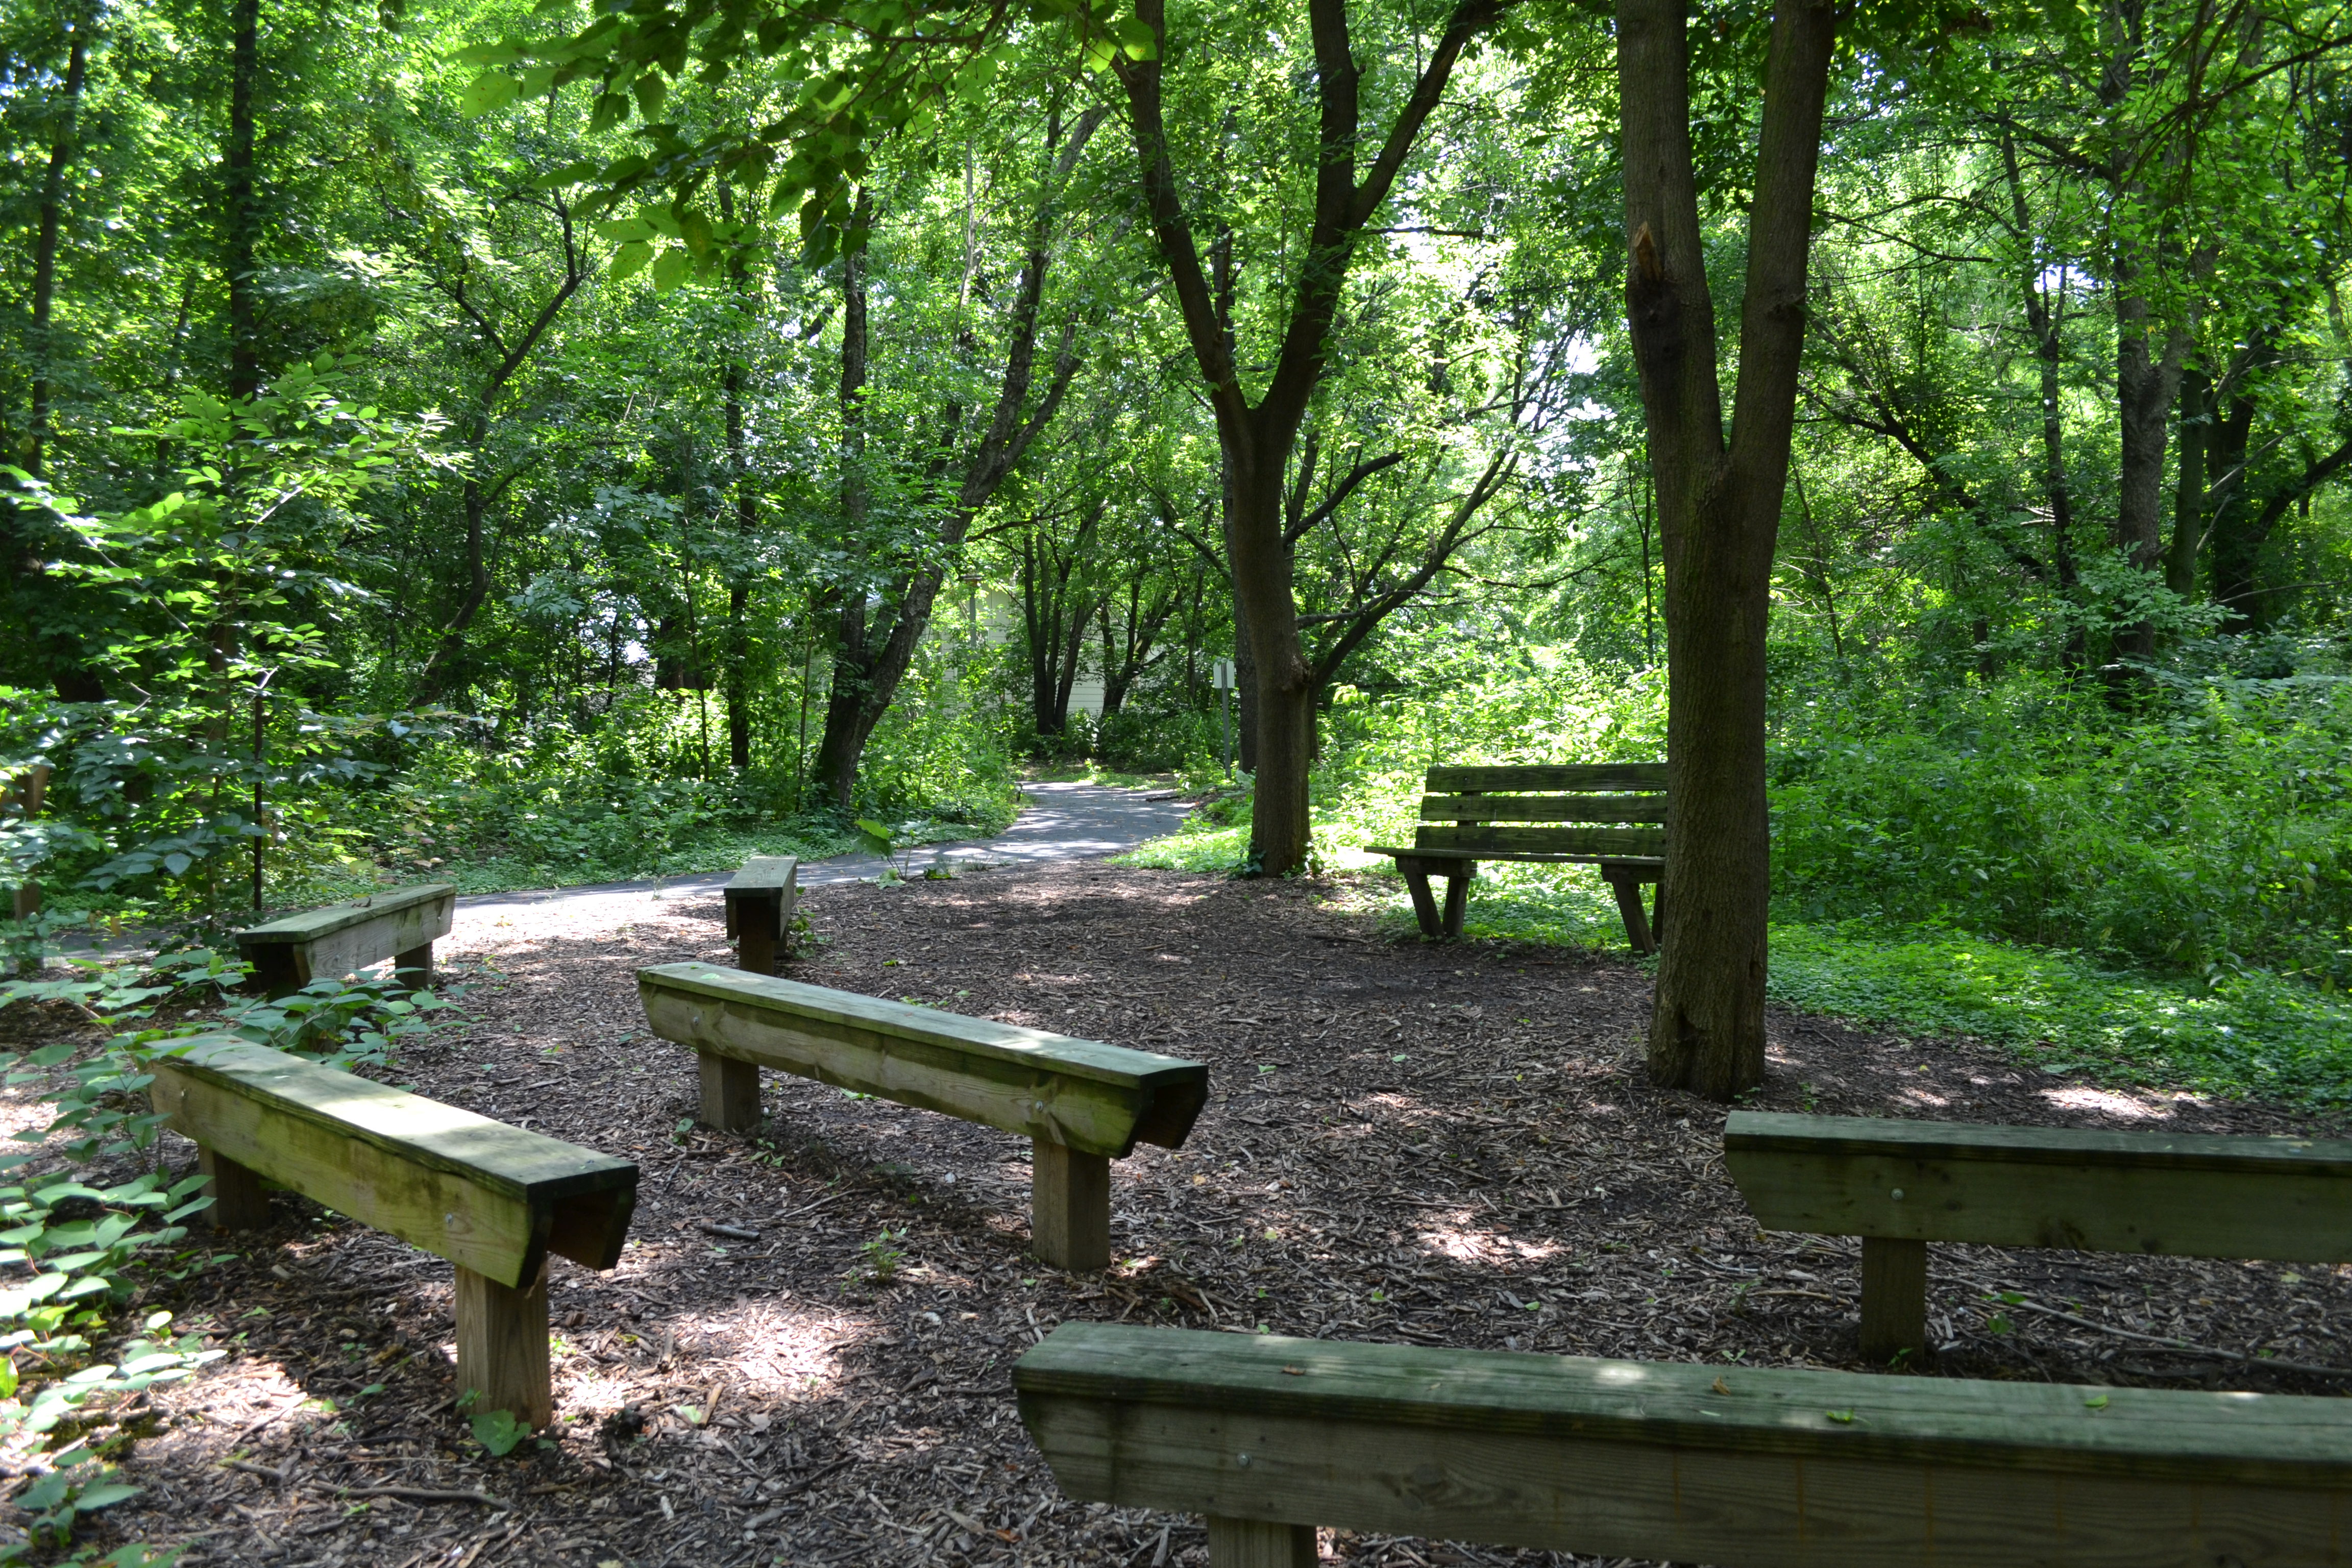 A small amphitheater offers an outdoor classroom and learning space